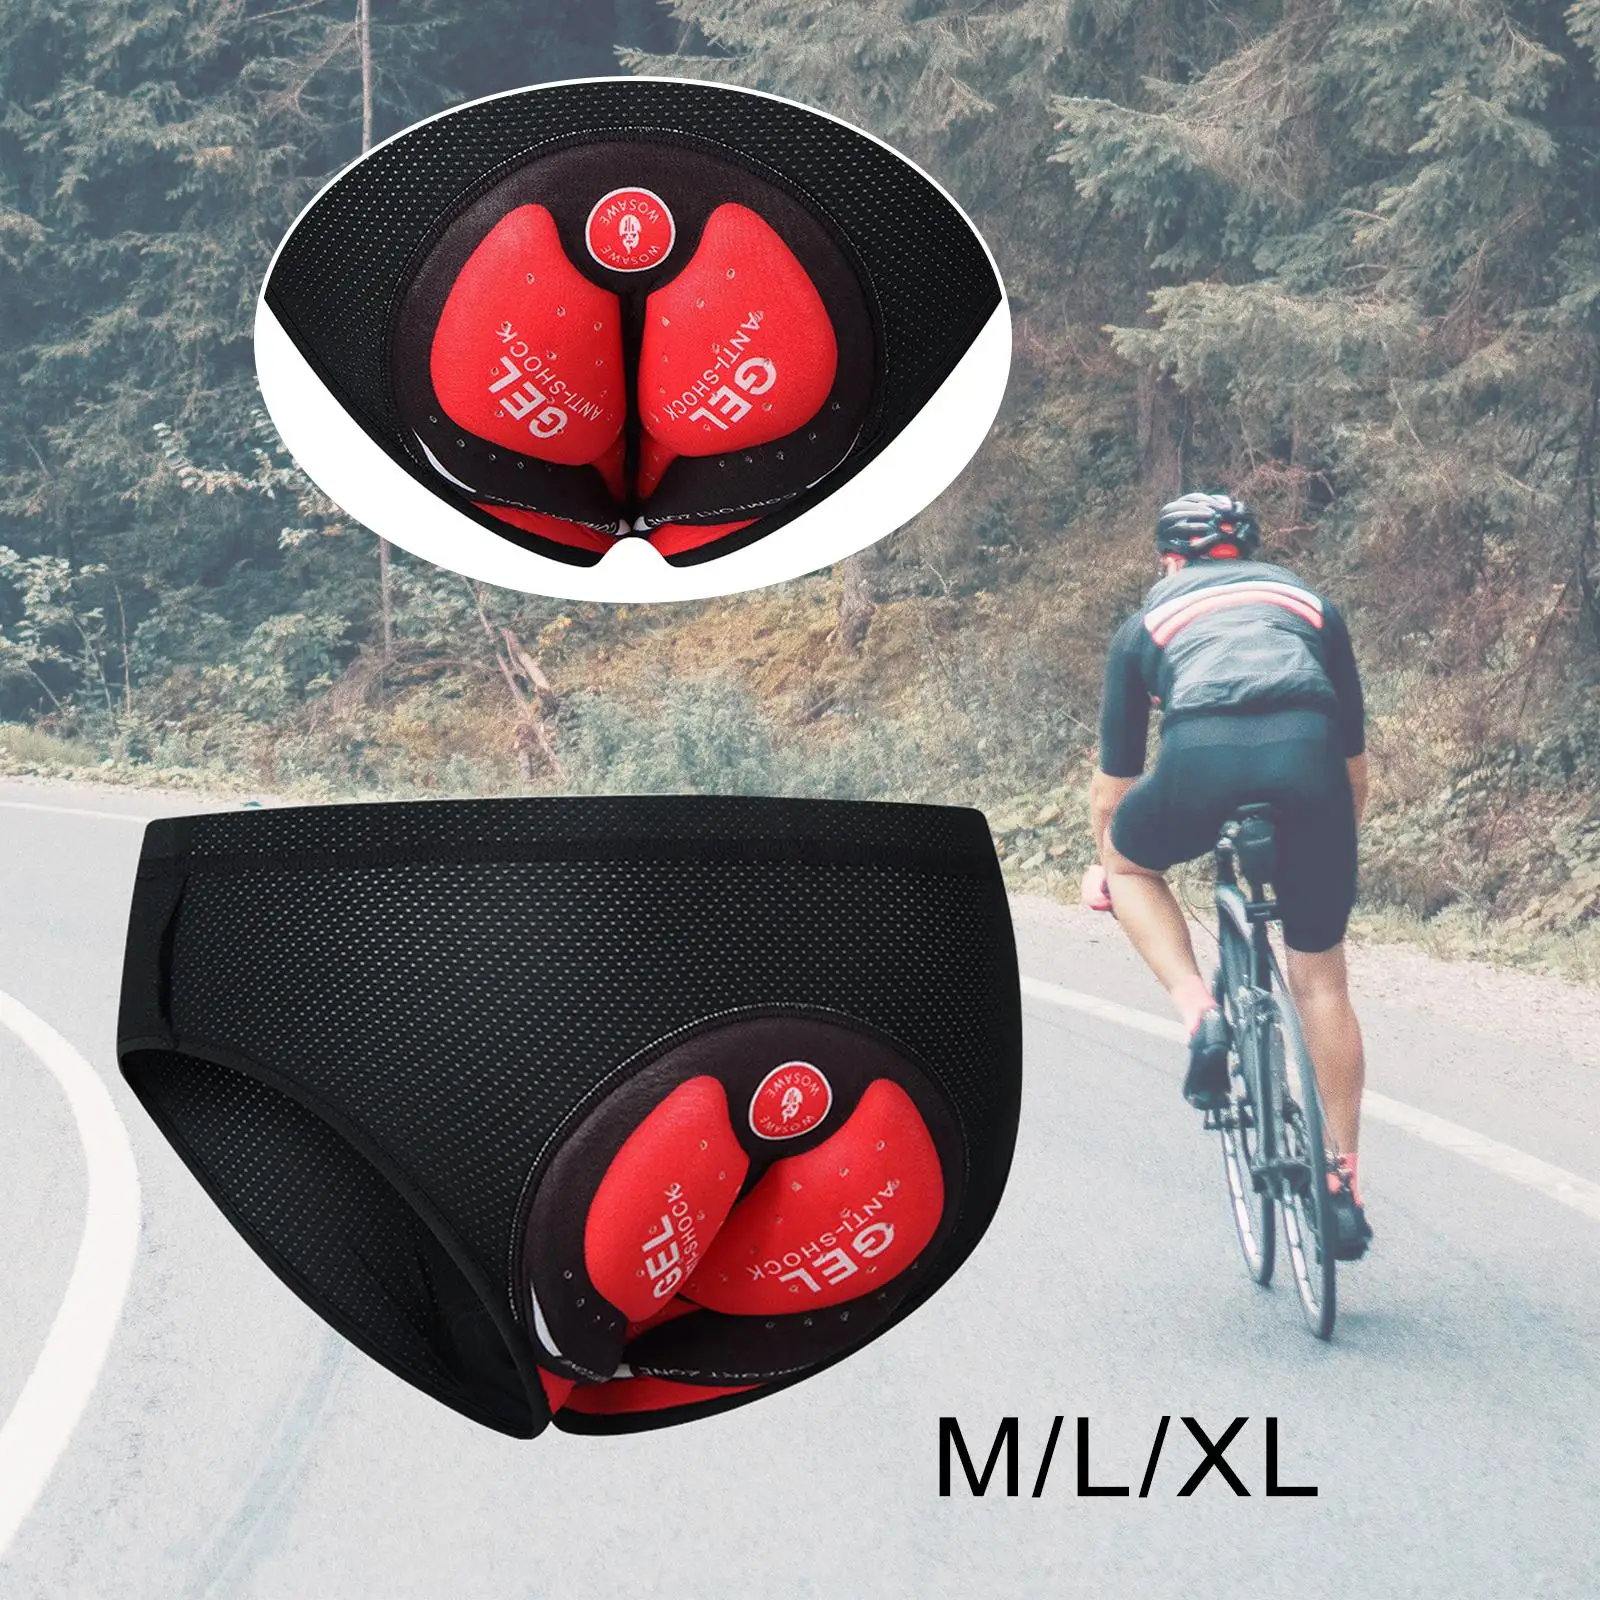 Men Cycling Shorts Briefs 3D Padding Liner Quick Dry Compression Bike Underwear for Riding Biker Mountain Road Bike Riding Cycle